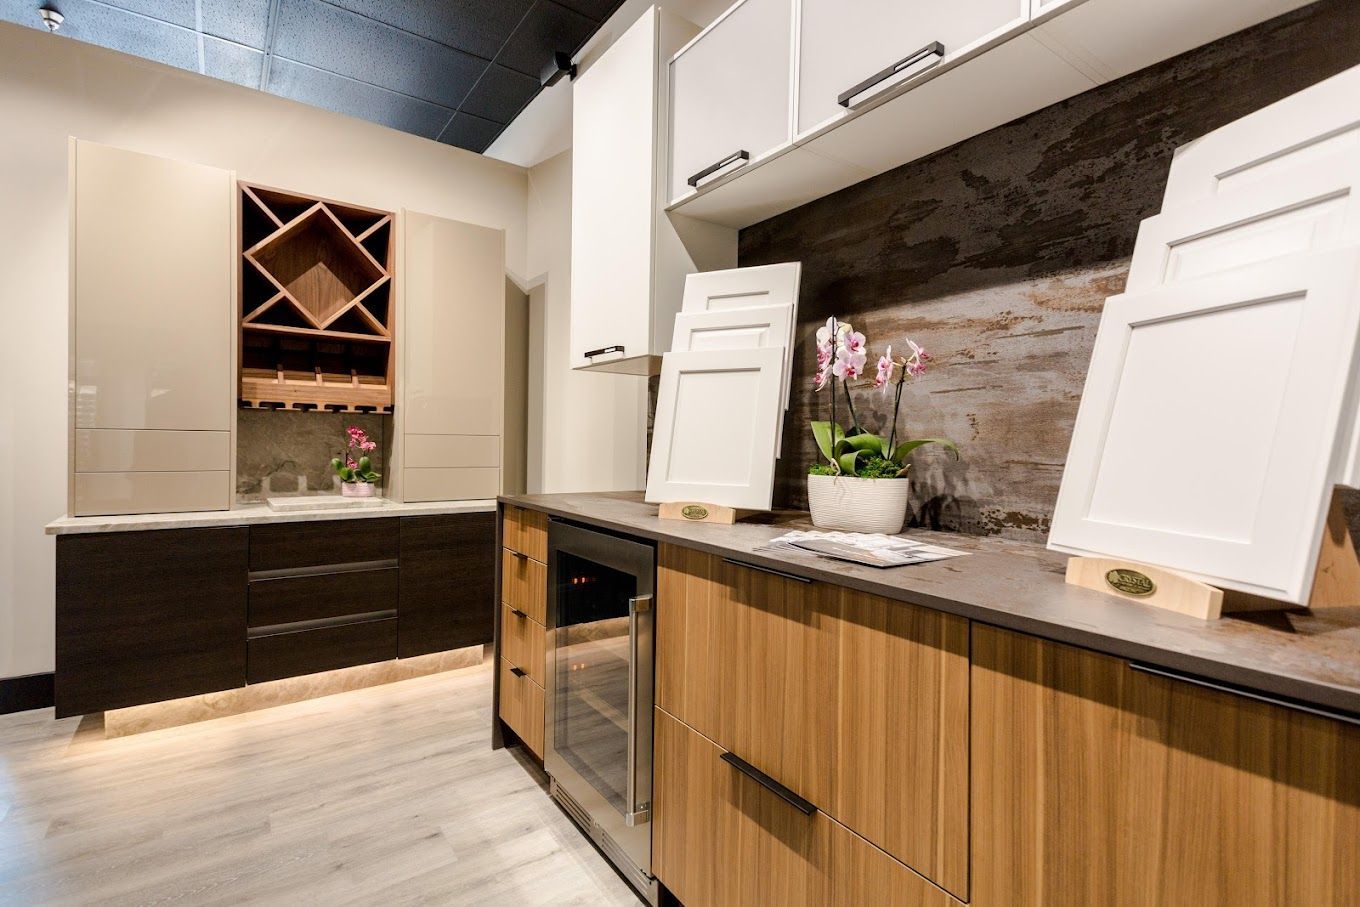 A kitchen with wooden cabinets and white cabinets